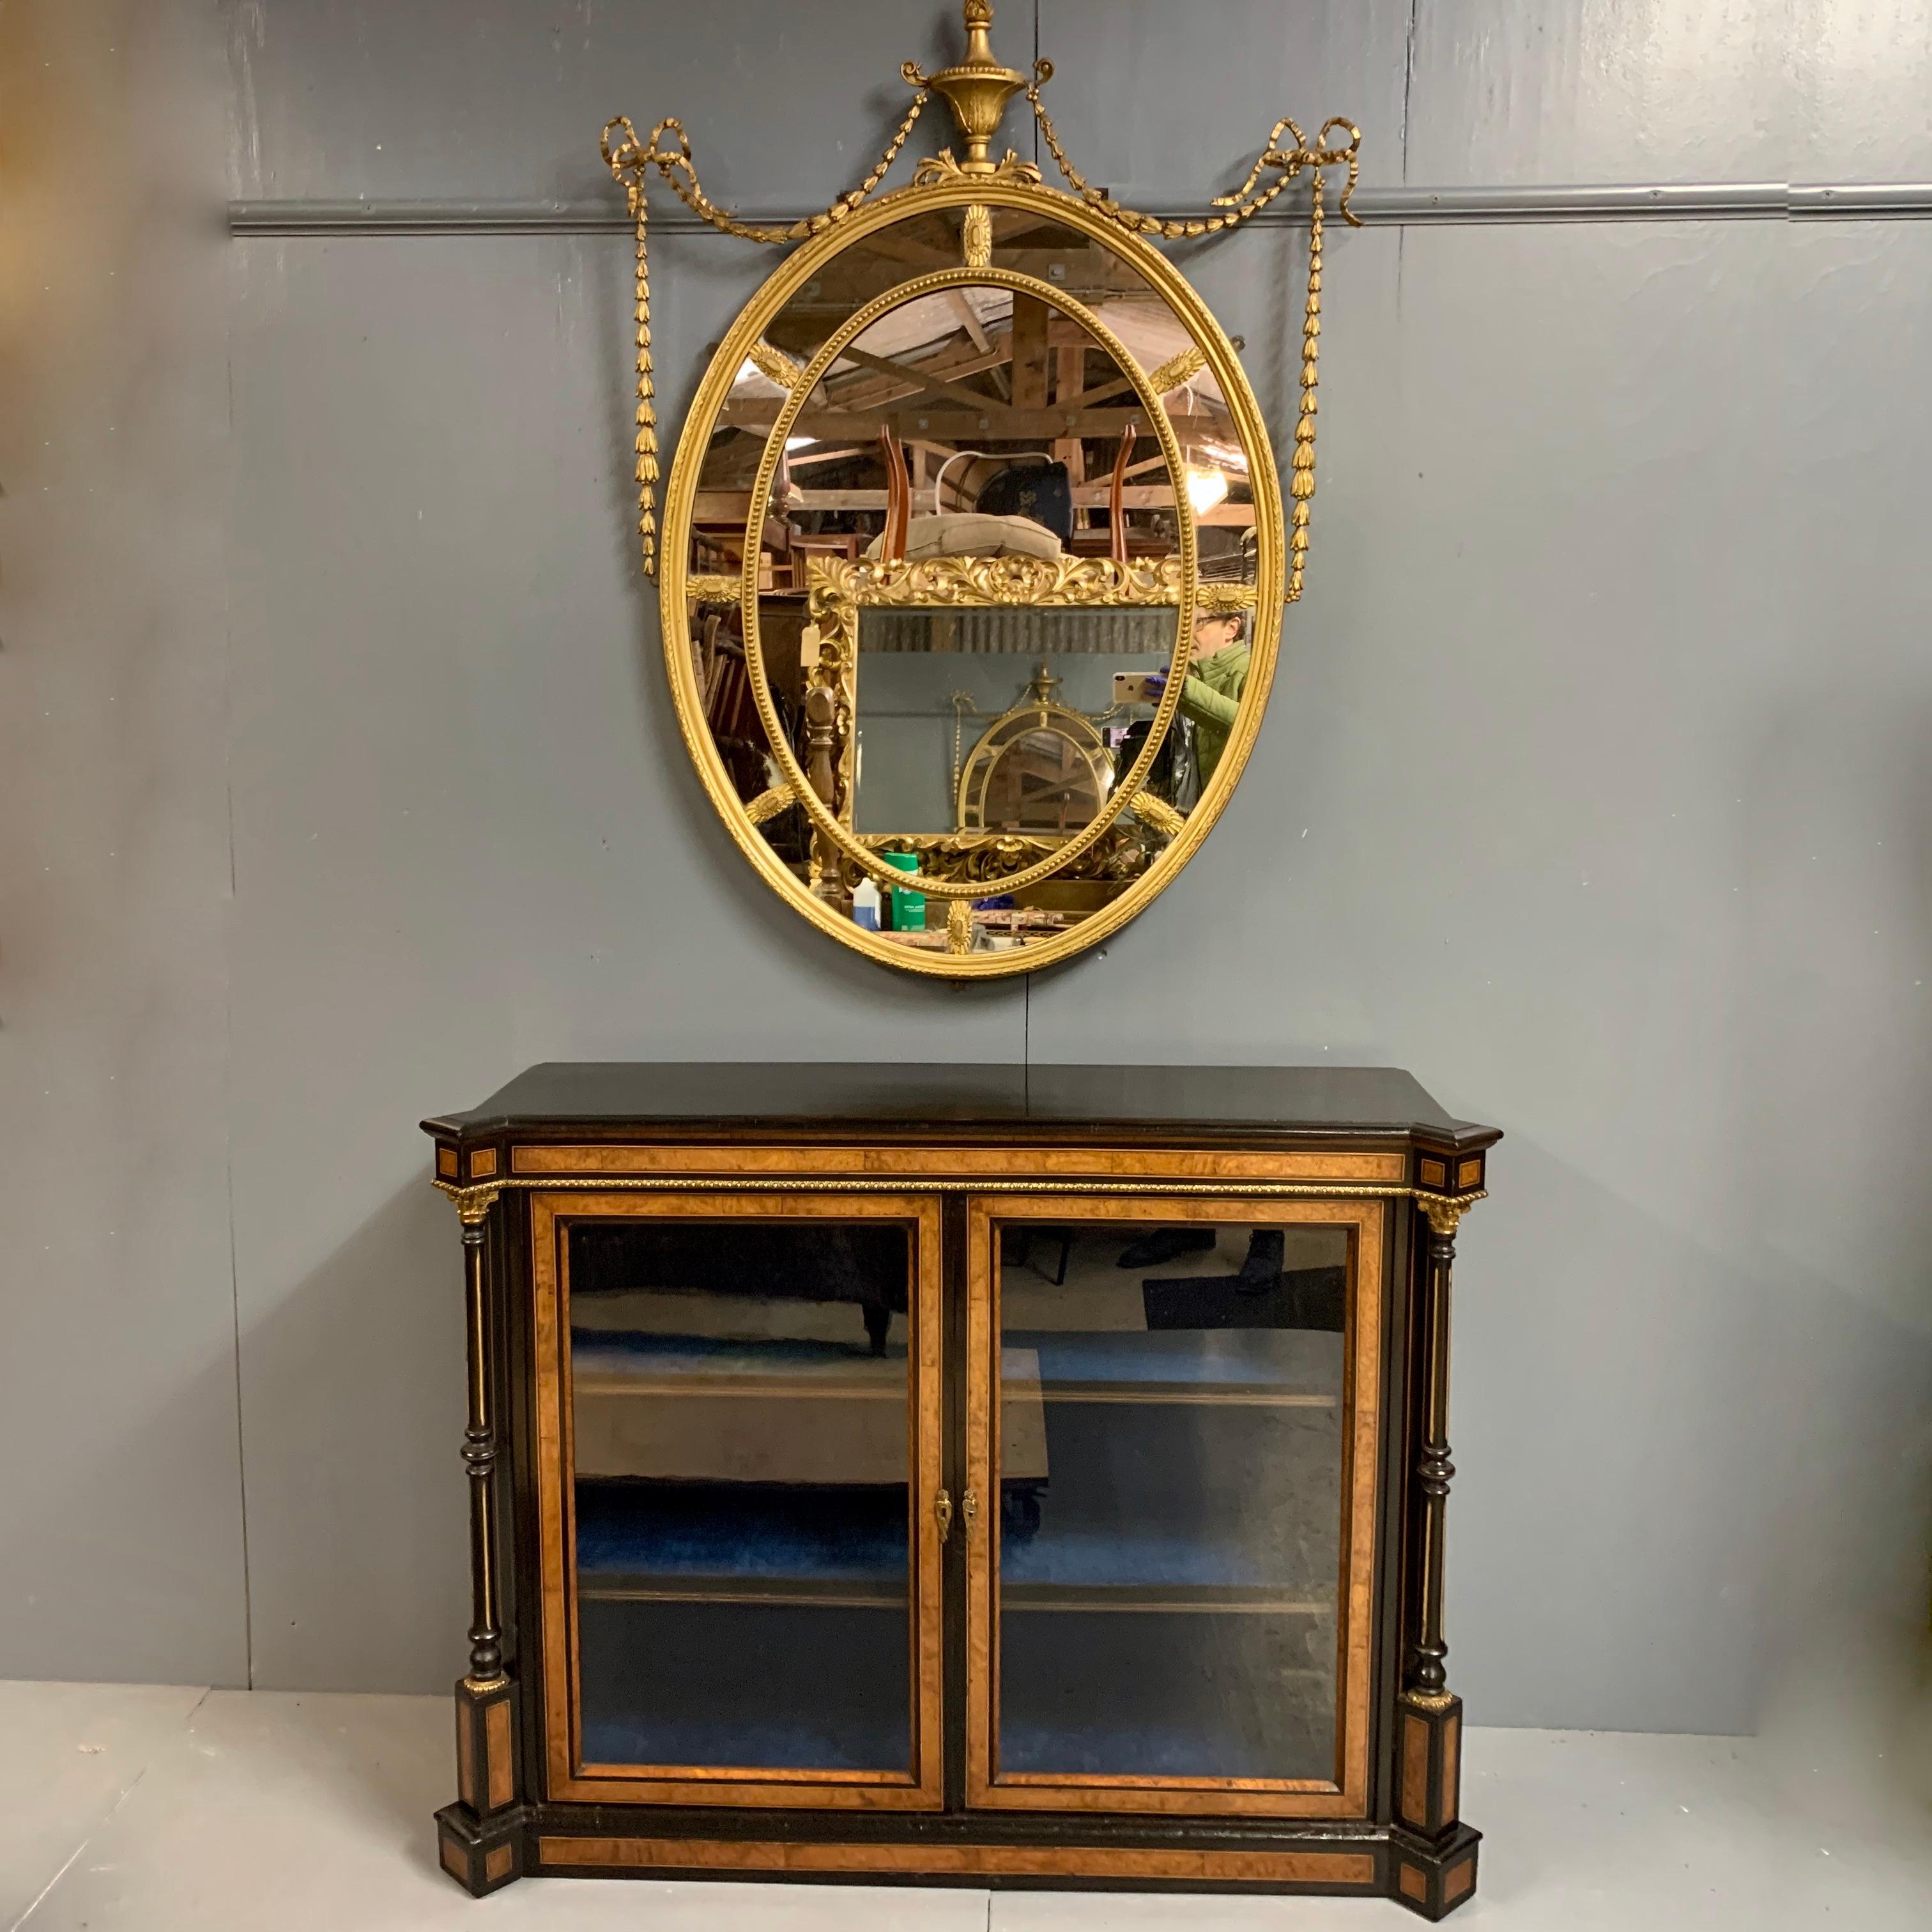 A very beautiful and impressive size 19th century gilt Adams style oval mirror with decorative urn and ribbon tied swags.
This is a lovely quality mirror and in great condition with only a few very minor restorations required (all done for you of